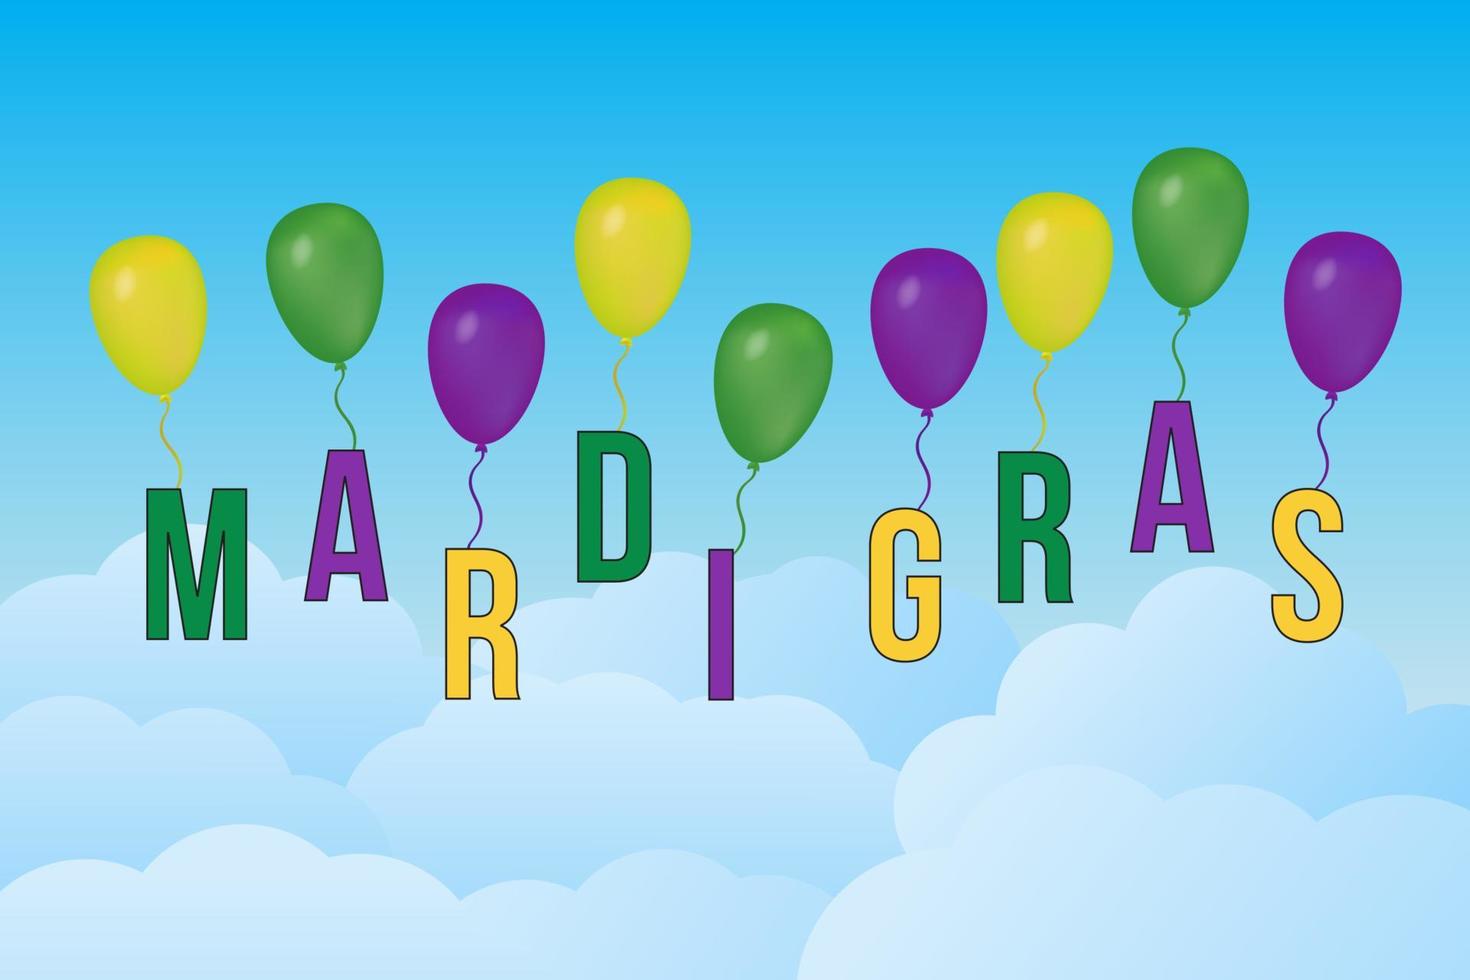 Mardi Gras carnival vector background with green, purple and yellow balloons in the sky. Easy to edit design template for your  projects.